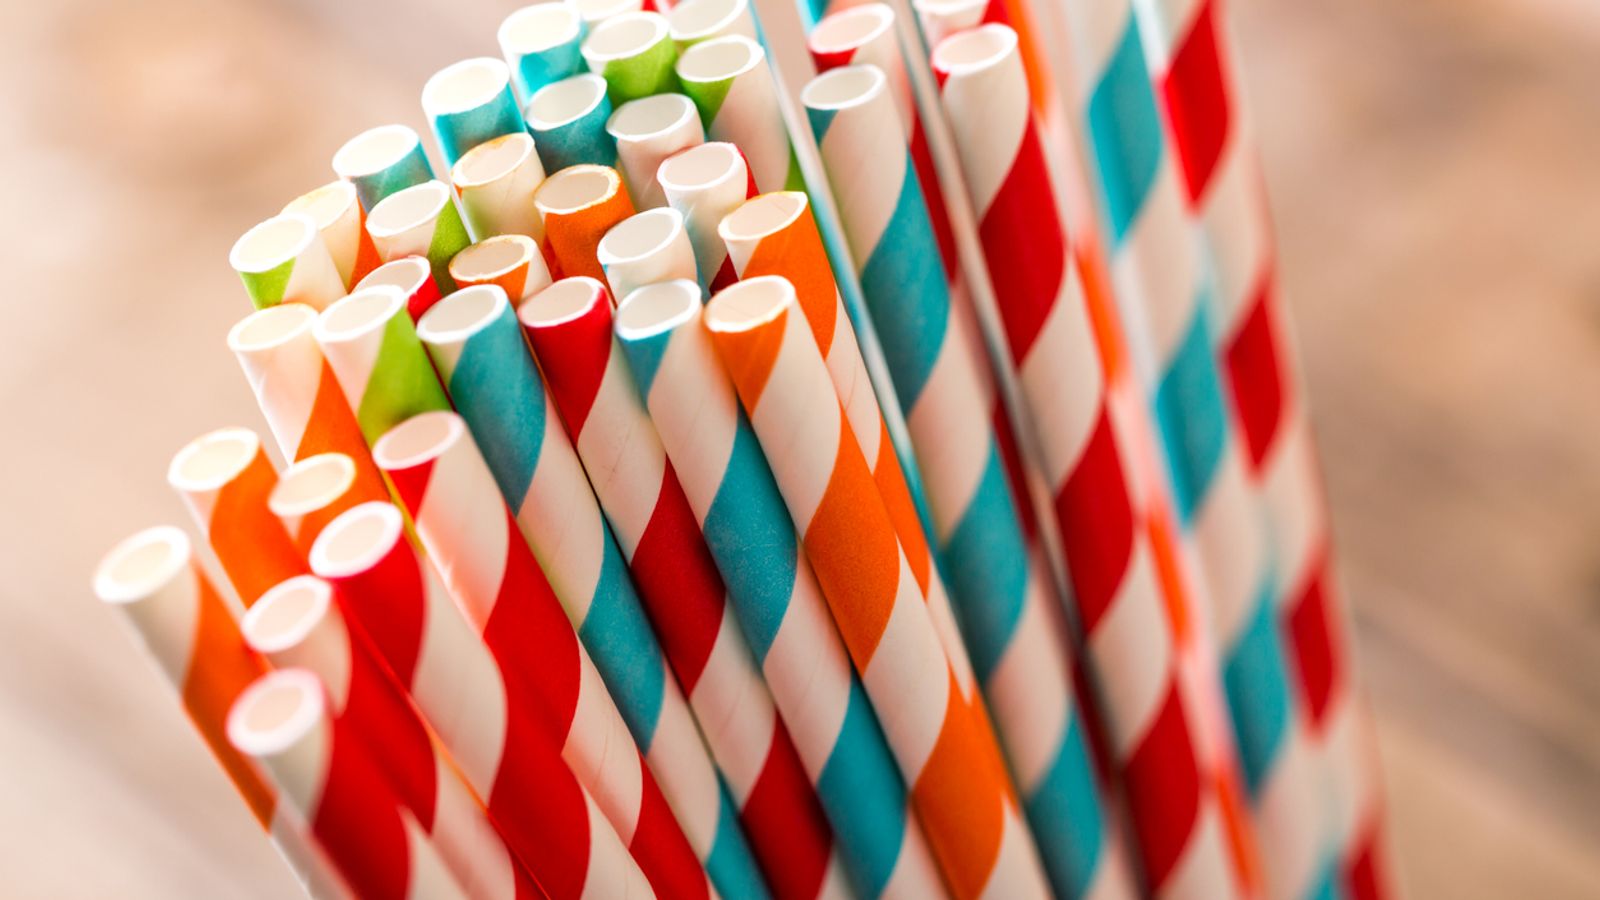 Paper straws found to contain long-lasting and potentially toxic chemicals – study | Science & Tech News